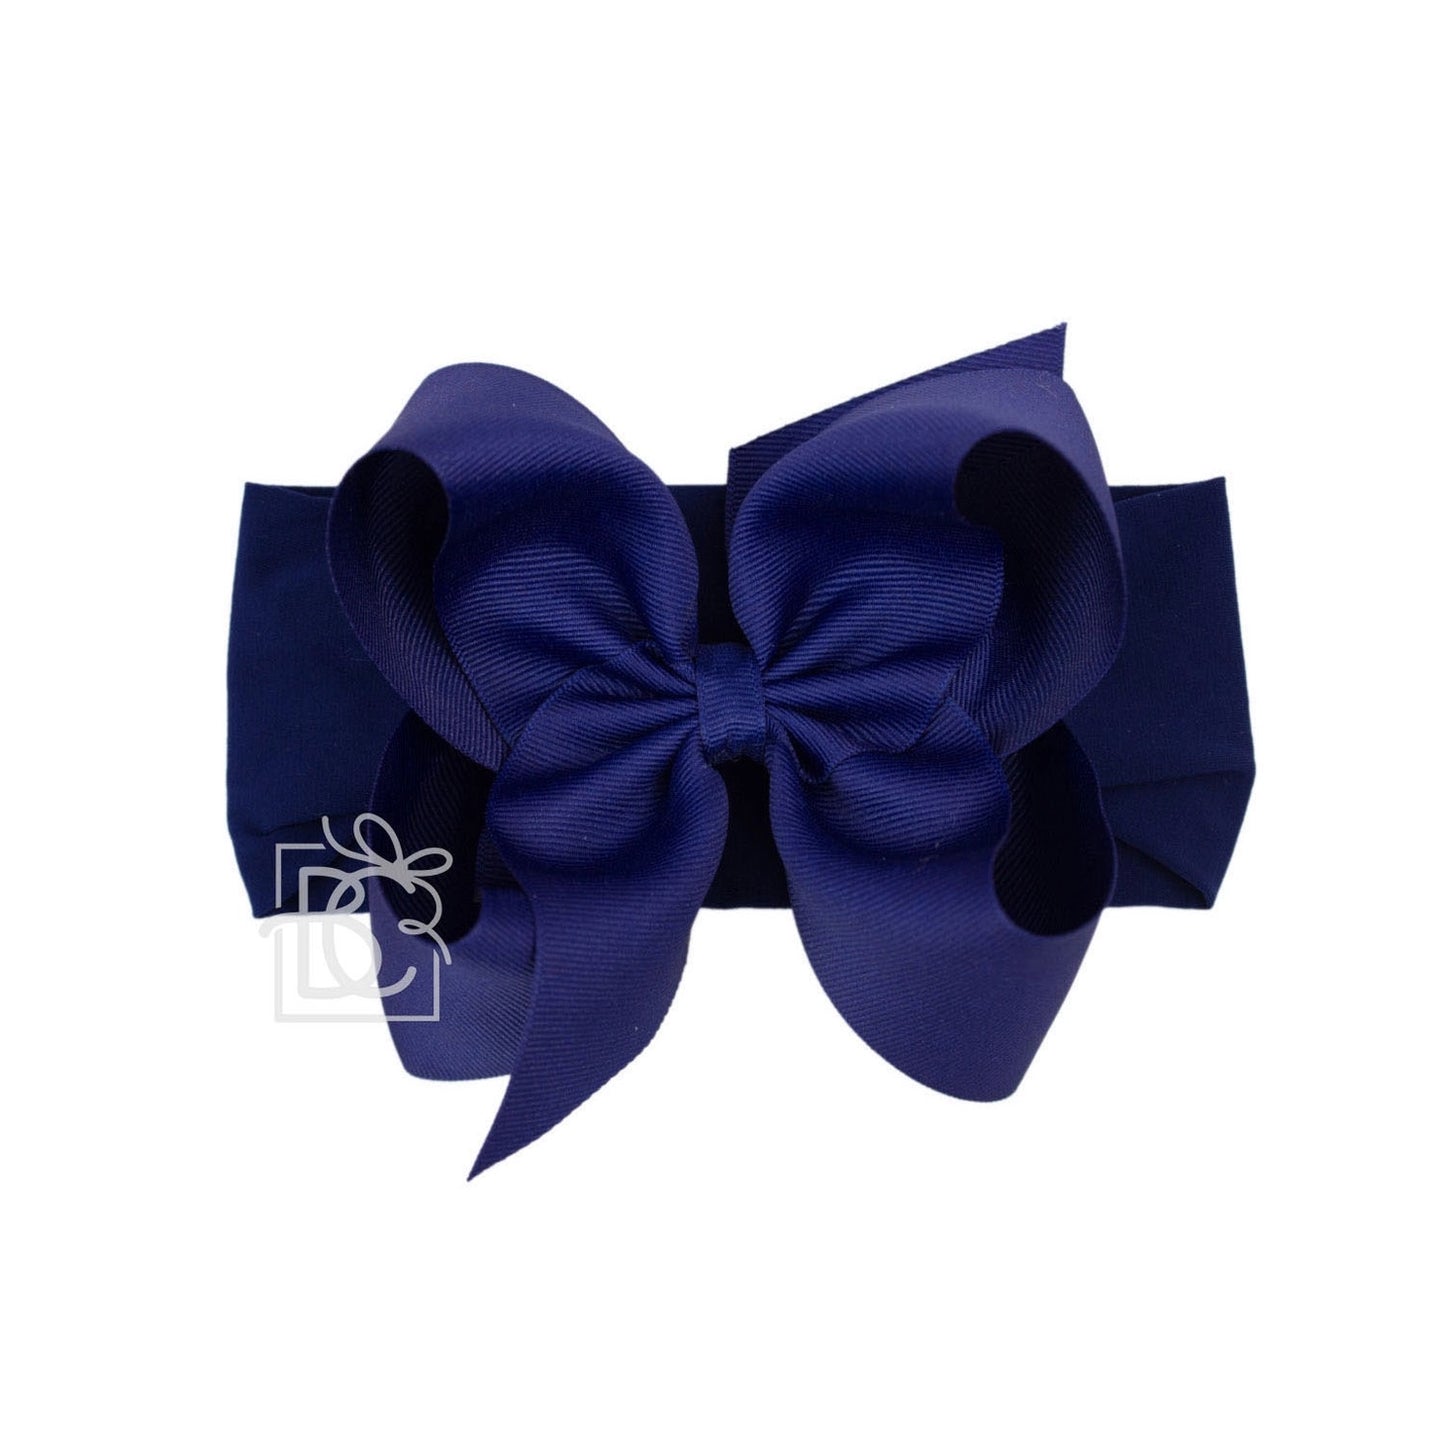 Panty Hose Headband with Extra Large Grosgrain Bow